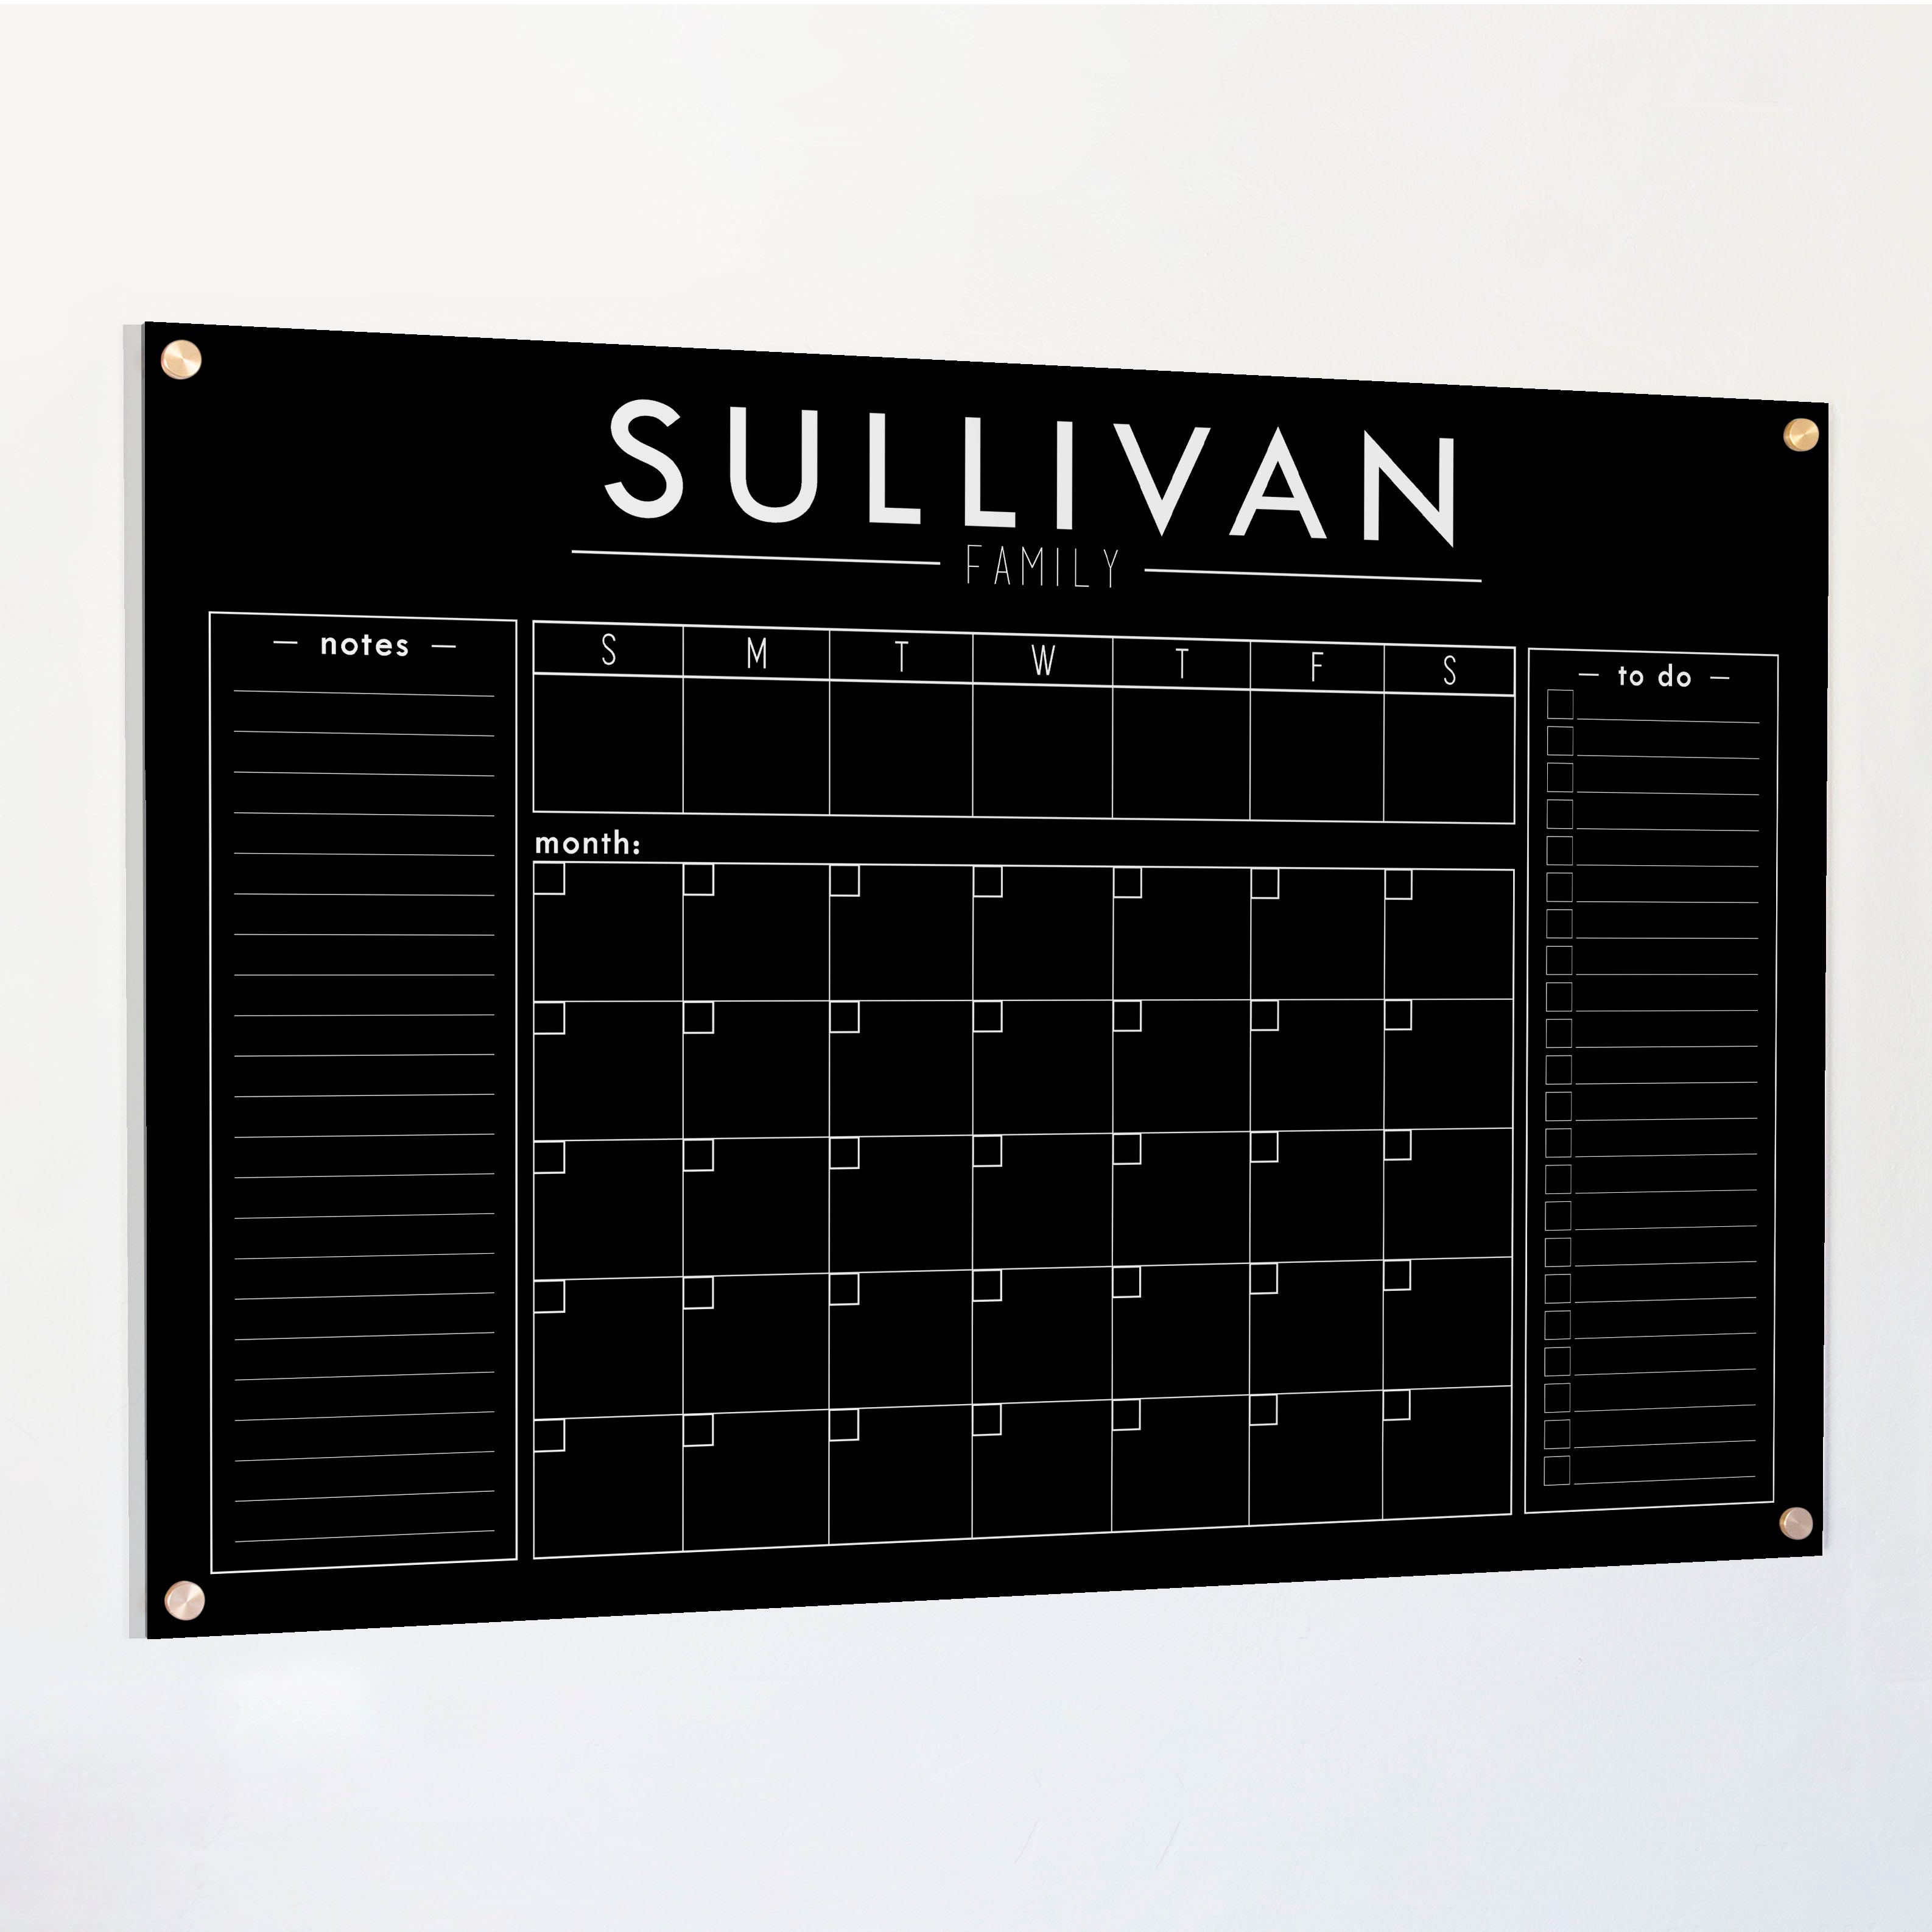 A Dry-erase calendar with a monthly and weekly format made of acrylic hanging on the wall